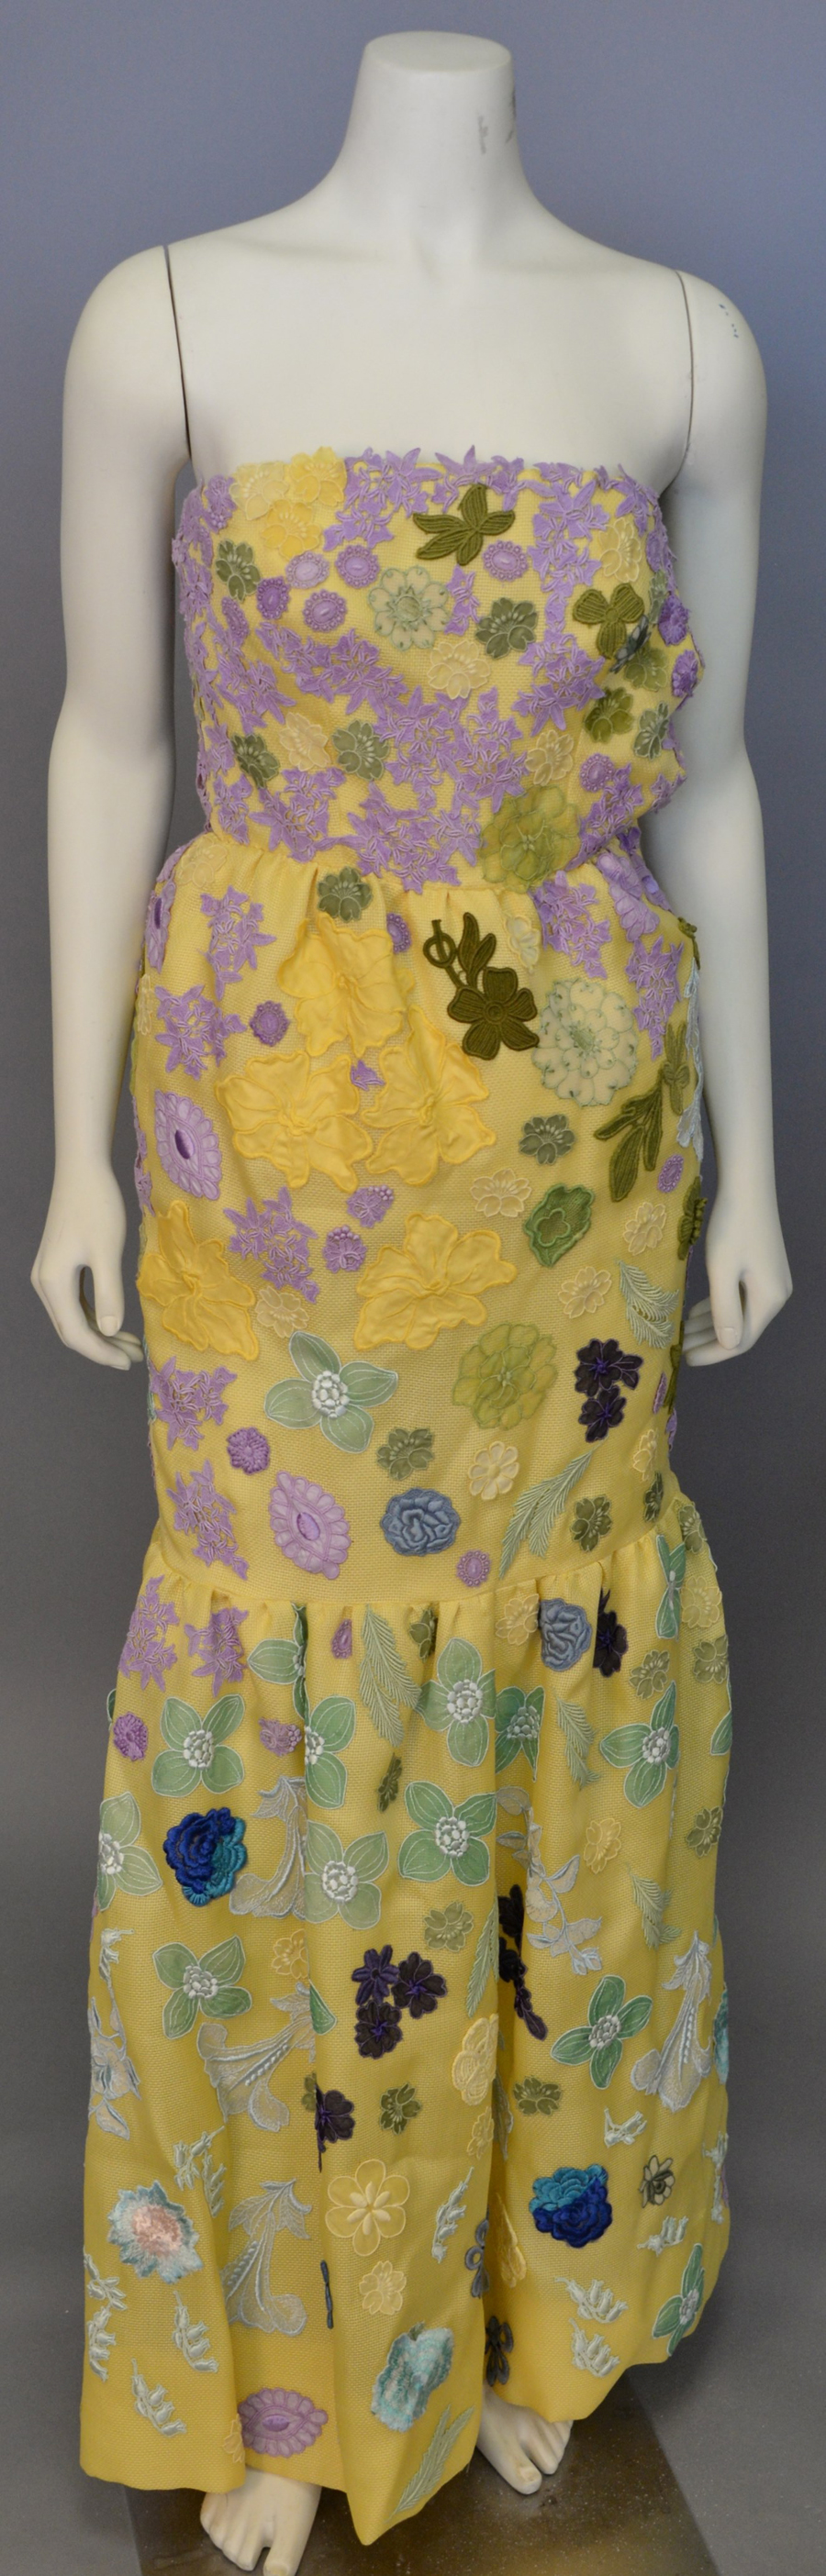 A Givenchy designer embroidered strapless dress, yellow appliquéd with multicolored flowers and leaves, went out at $ 2,000.